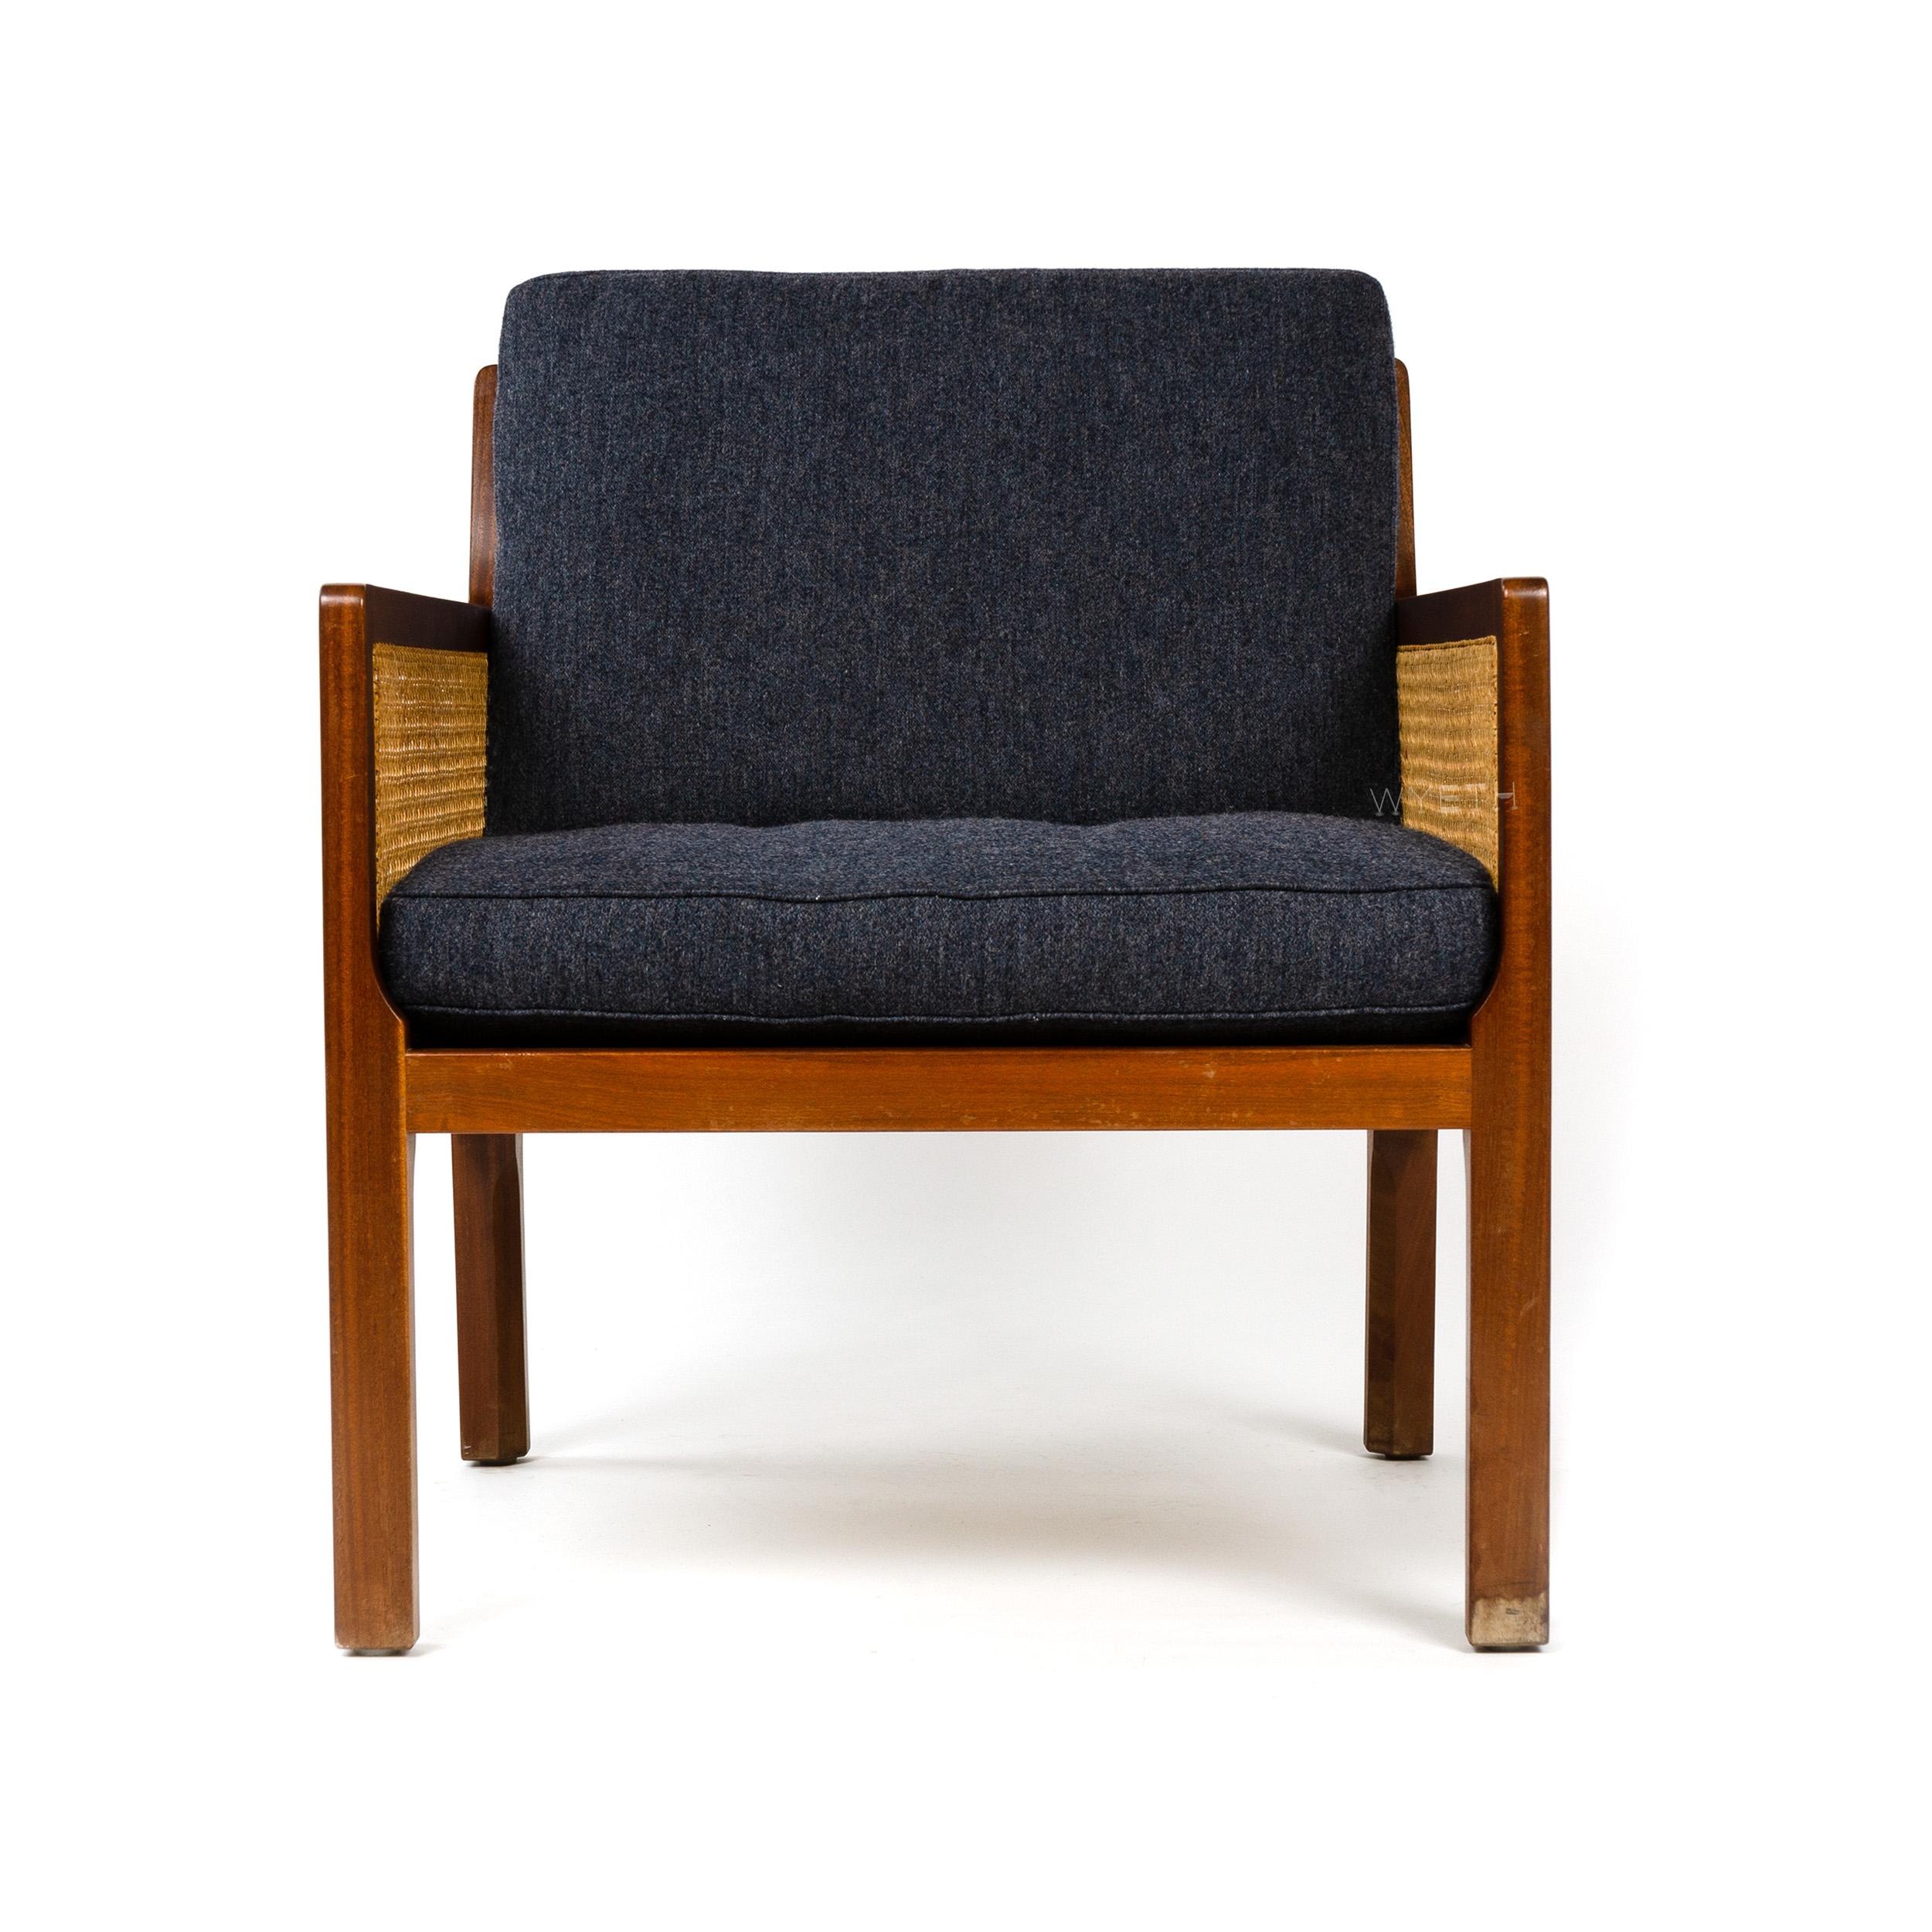 A mahogany lounge chair with traditional hand-caned back and side panels, with newly upholstered dark grey Savak wool seat and back cushions.